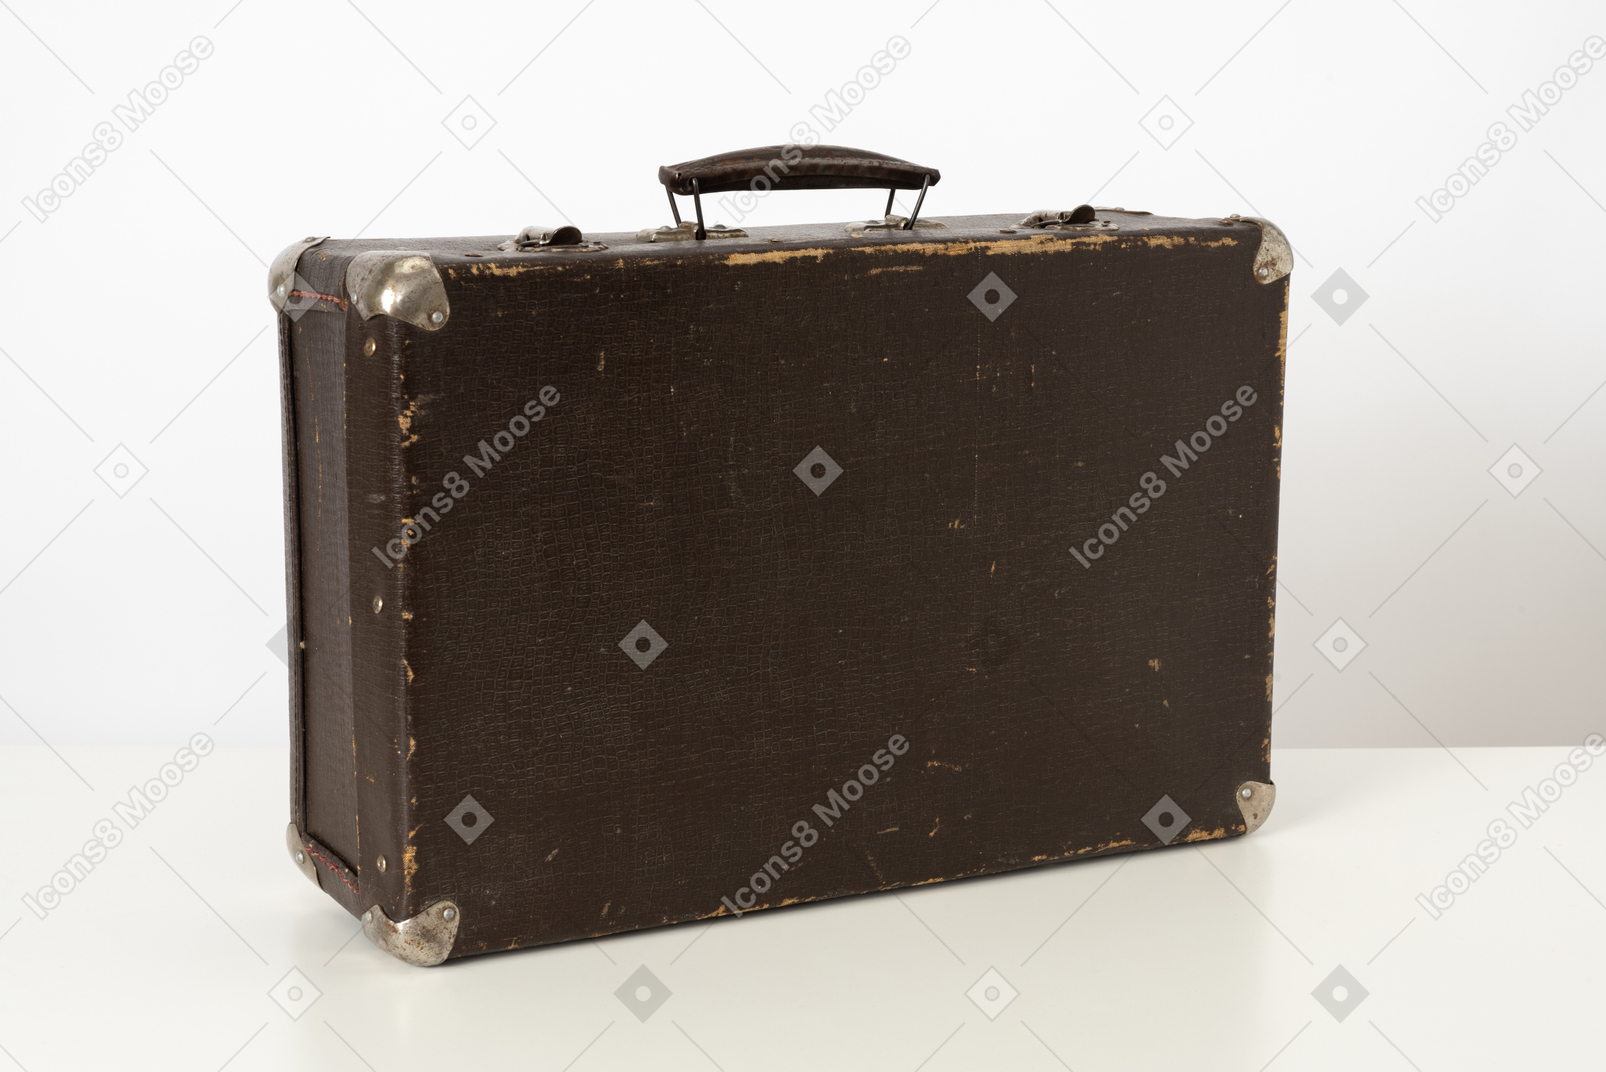 Old suitcase on a white background